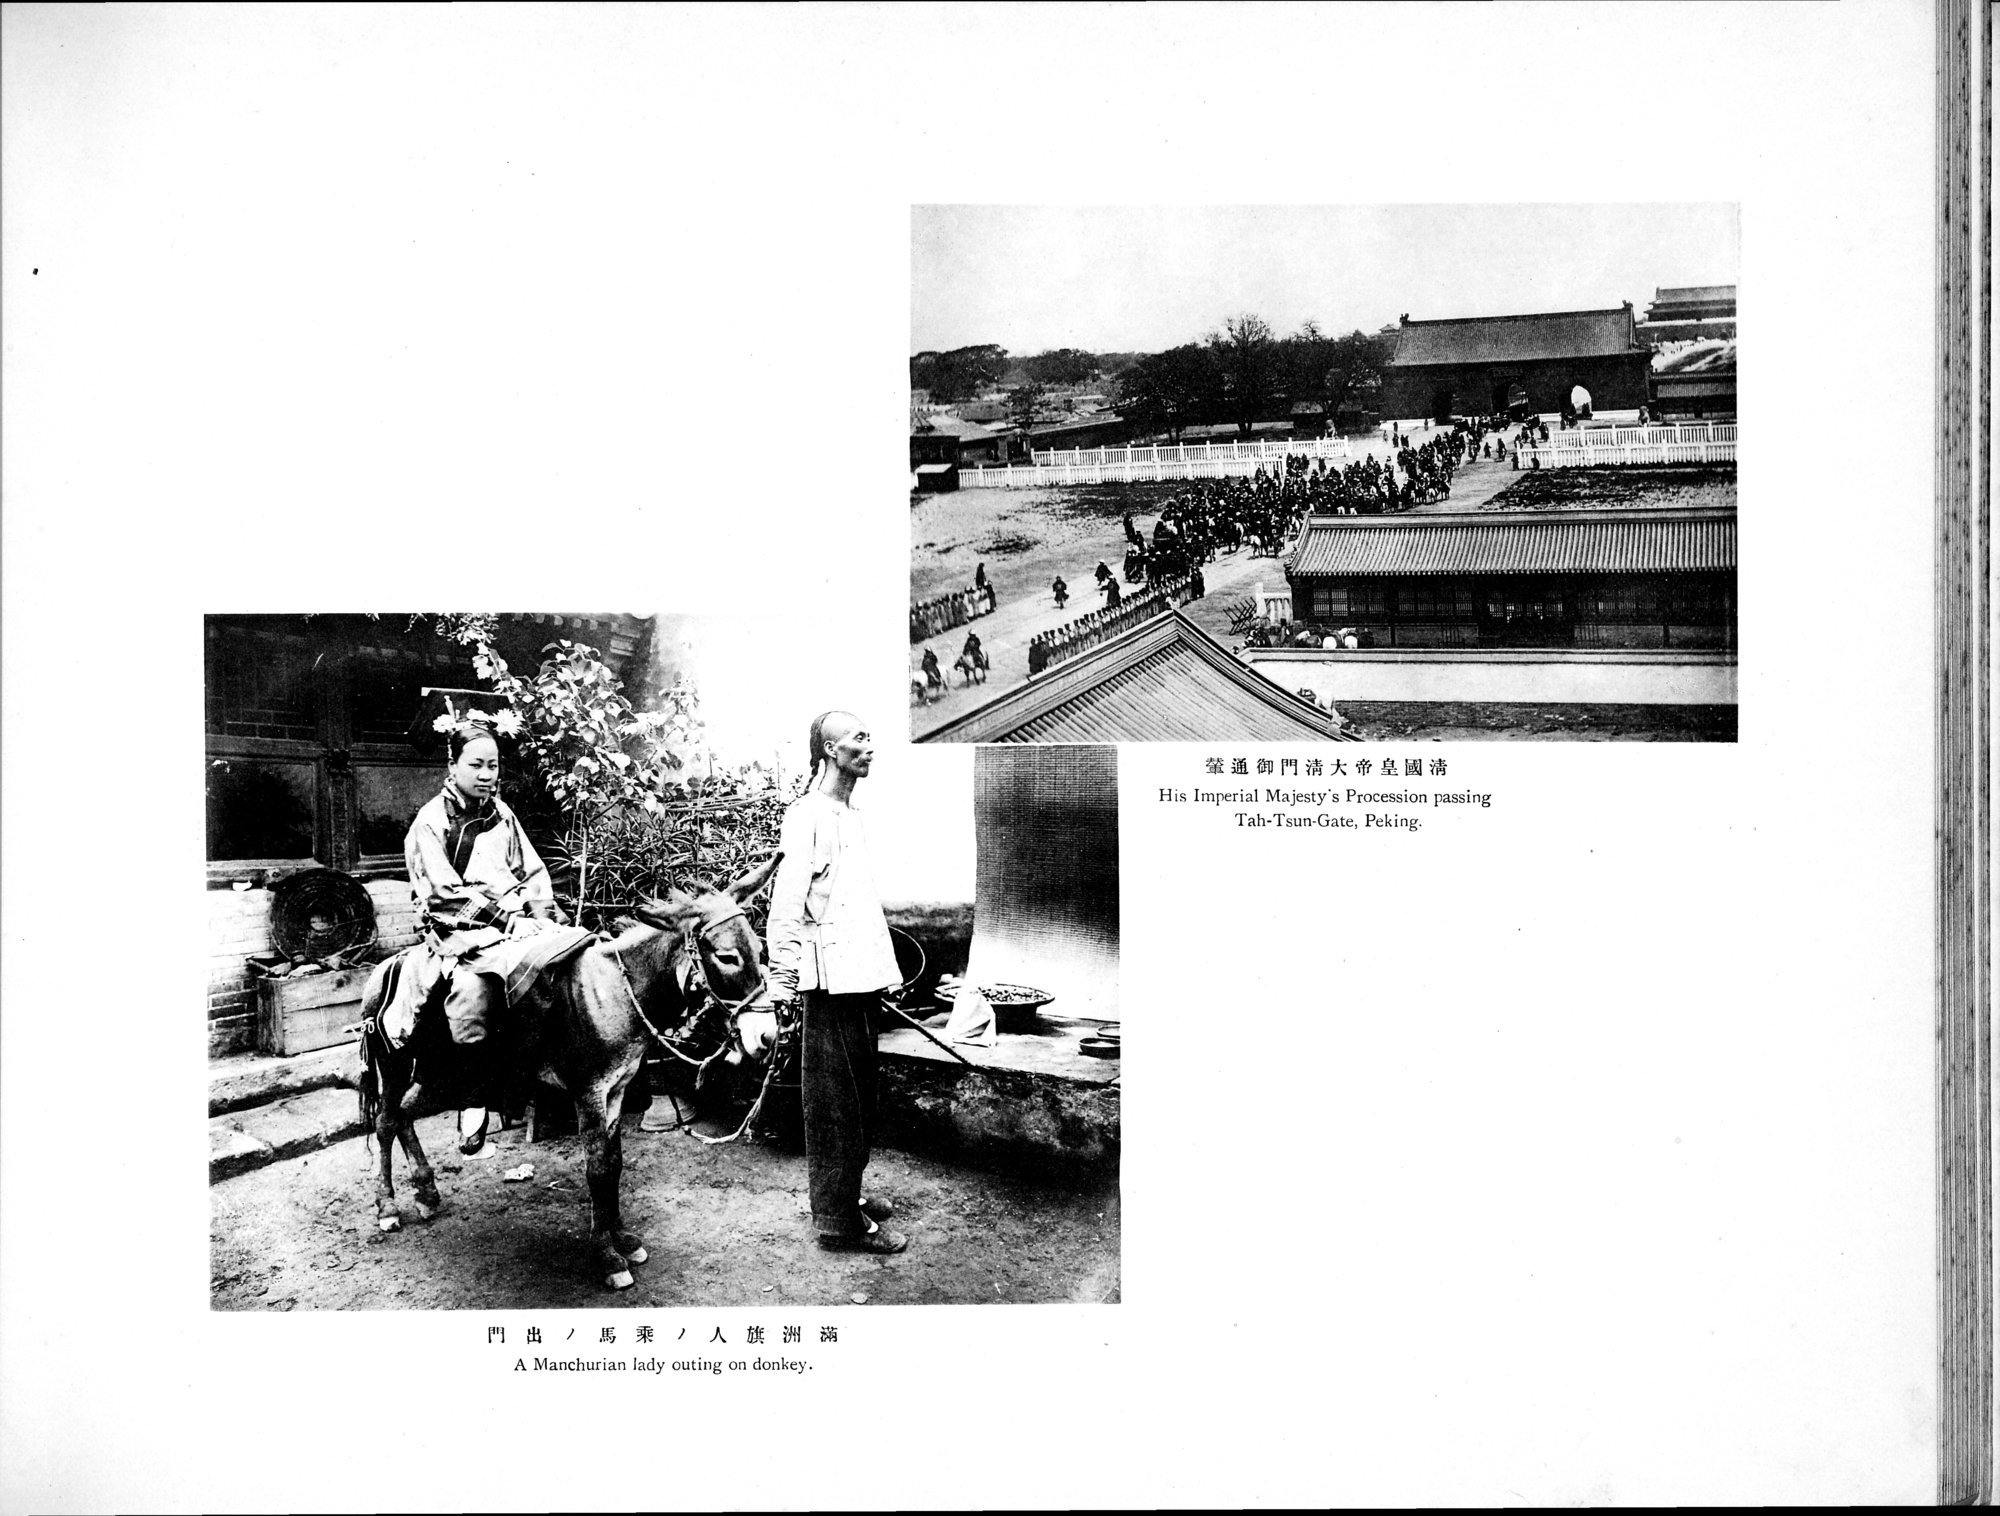 Views and Custom of North China : vol.1 / Page 111 (Grayscale High Resolution Image)